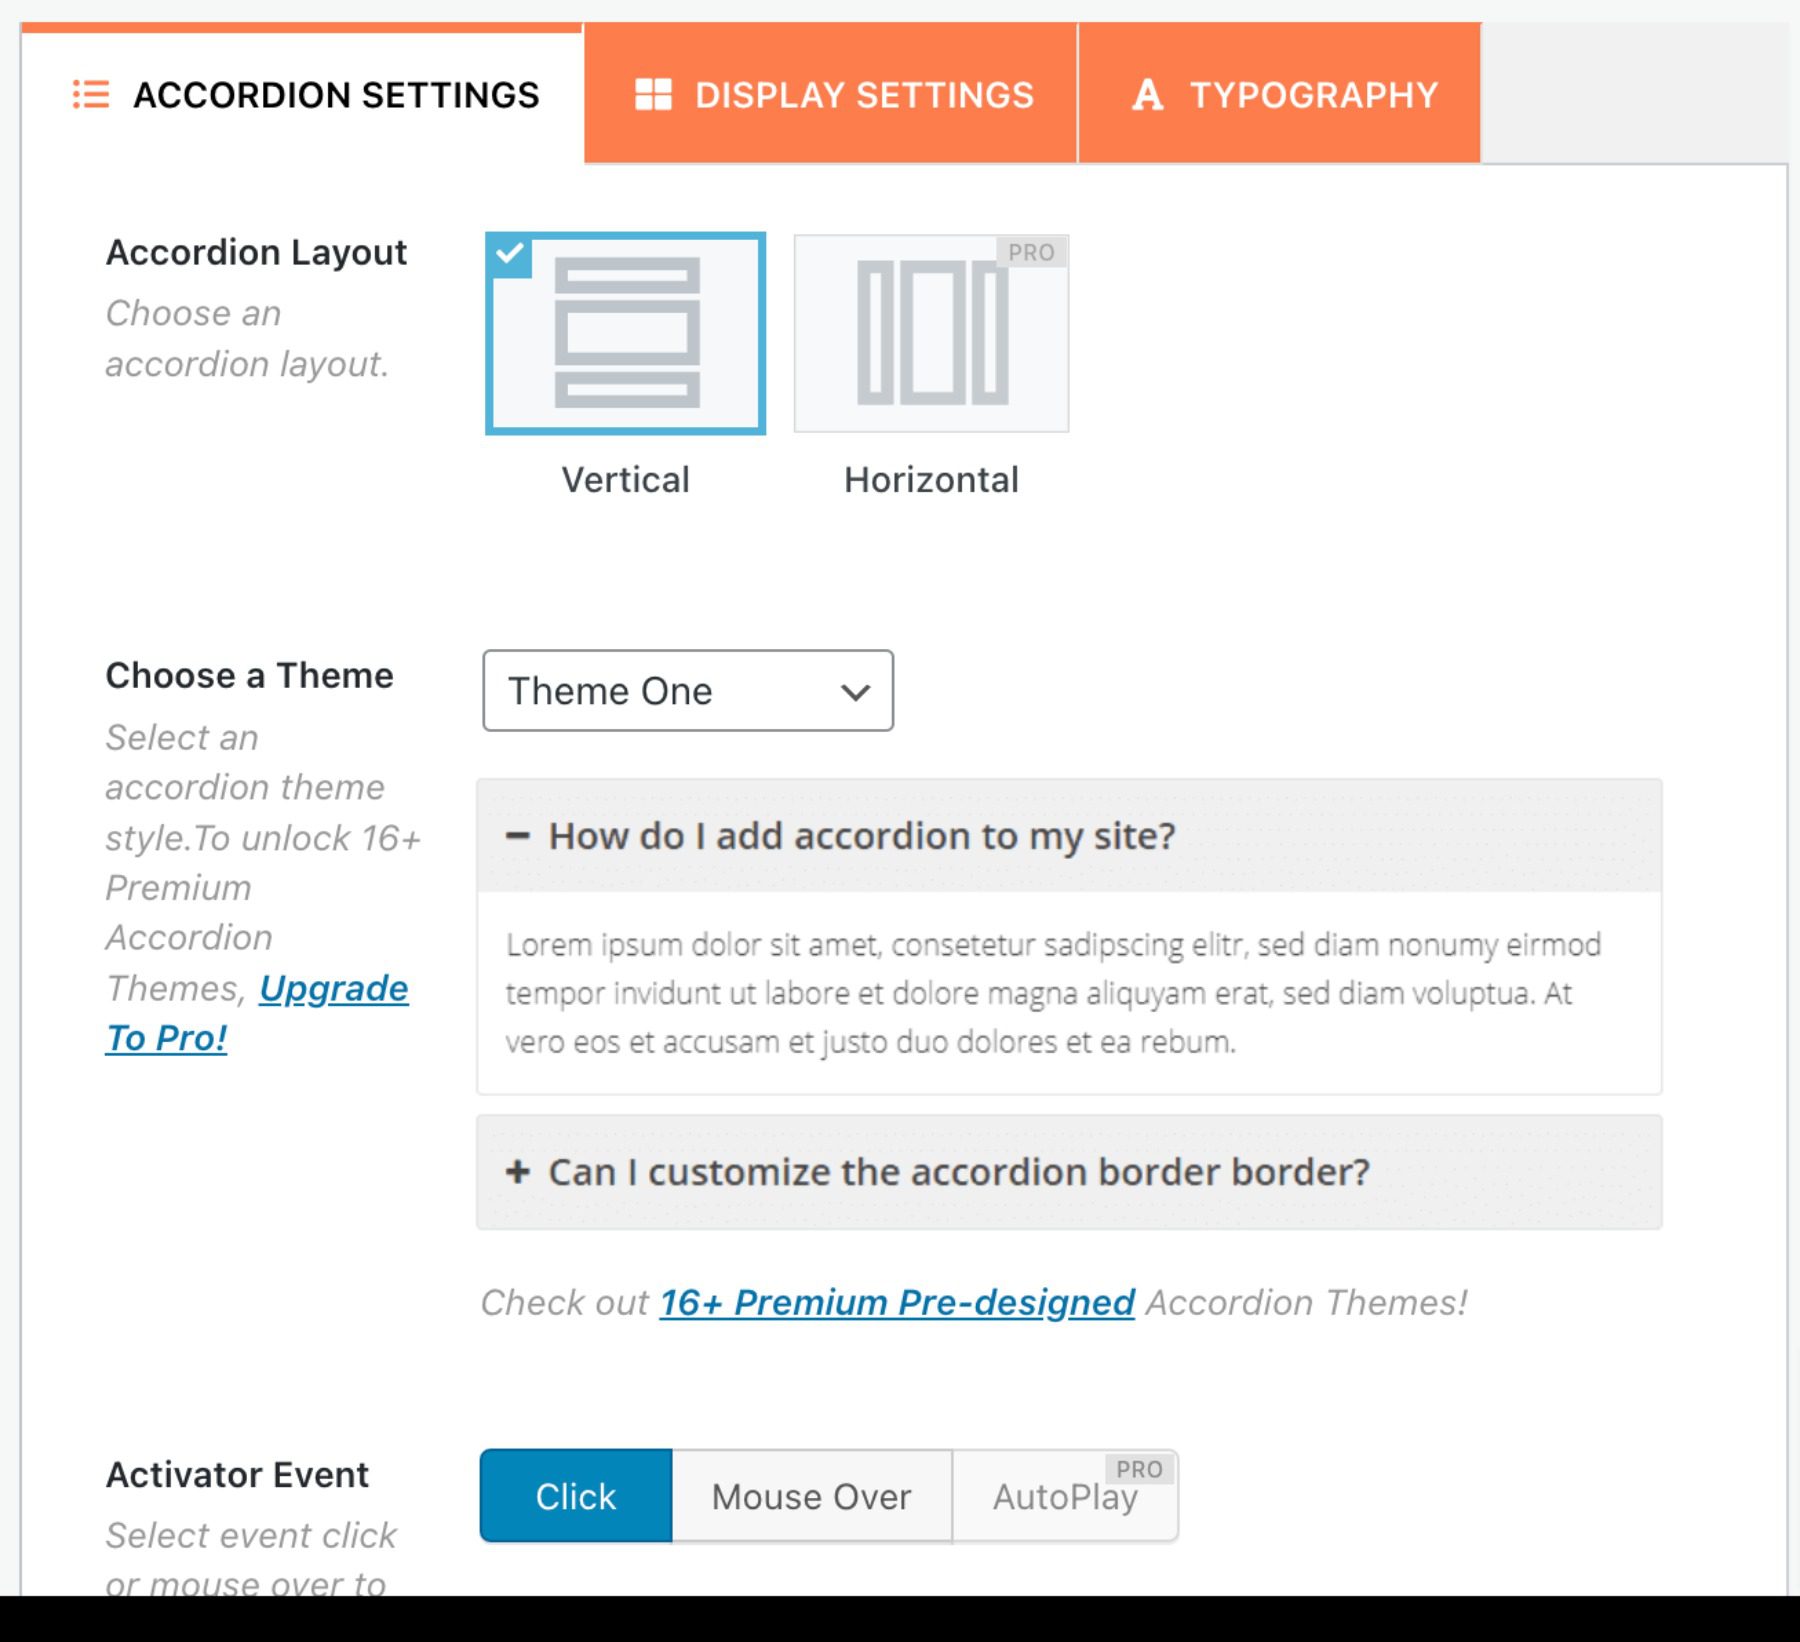 Easy accordion settings page